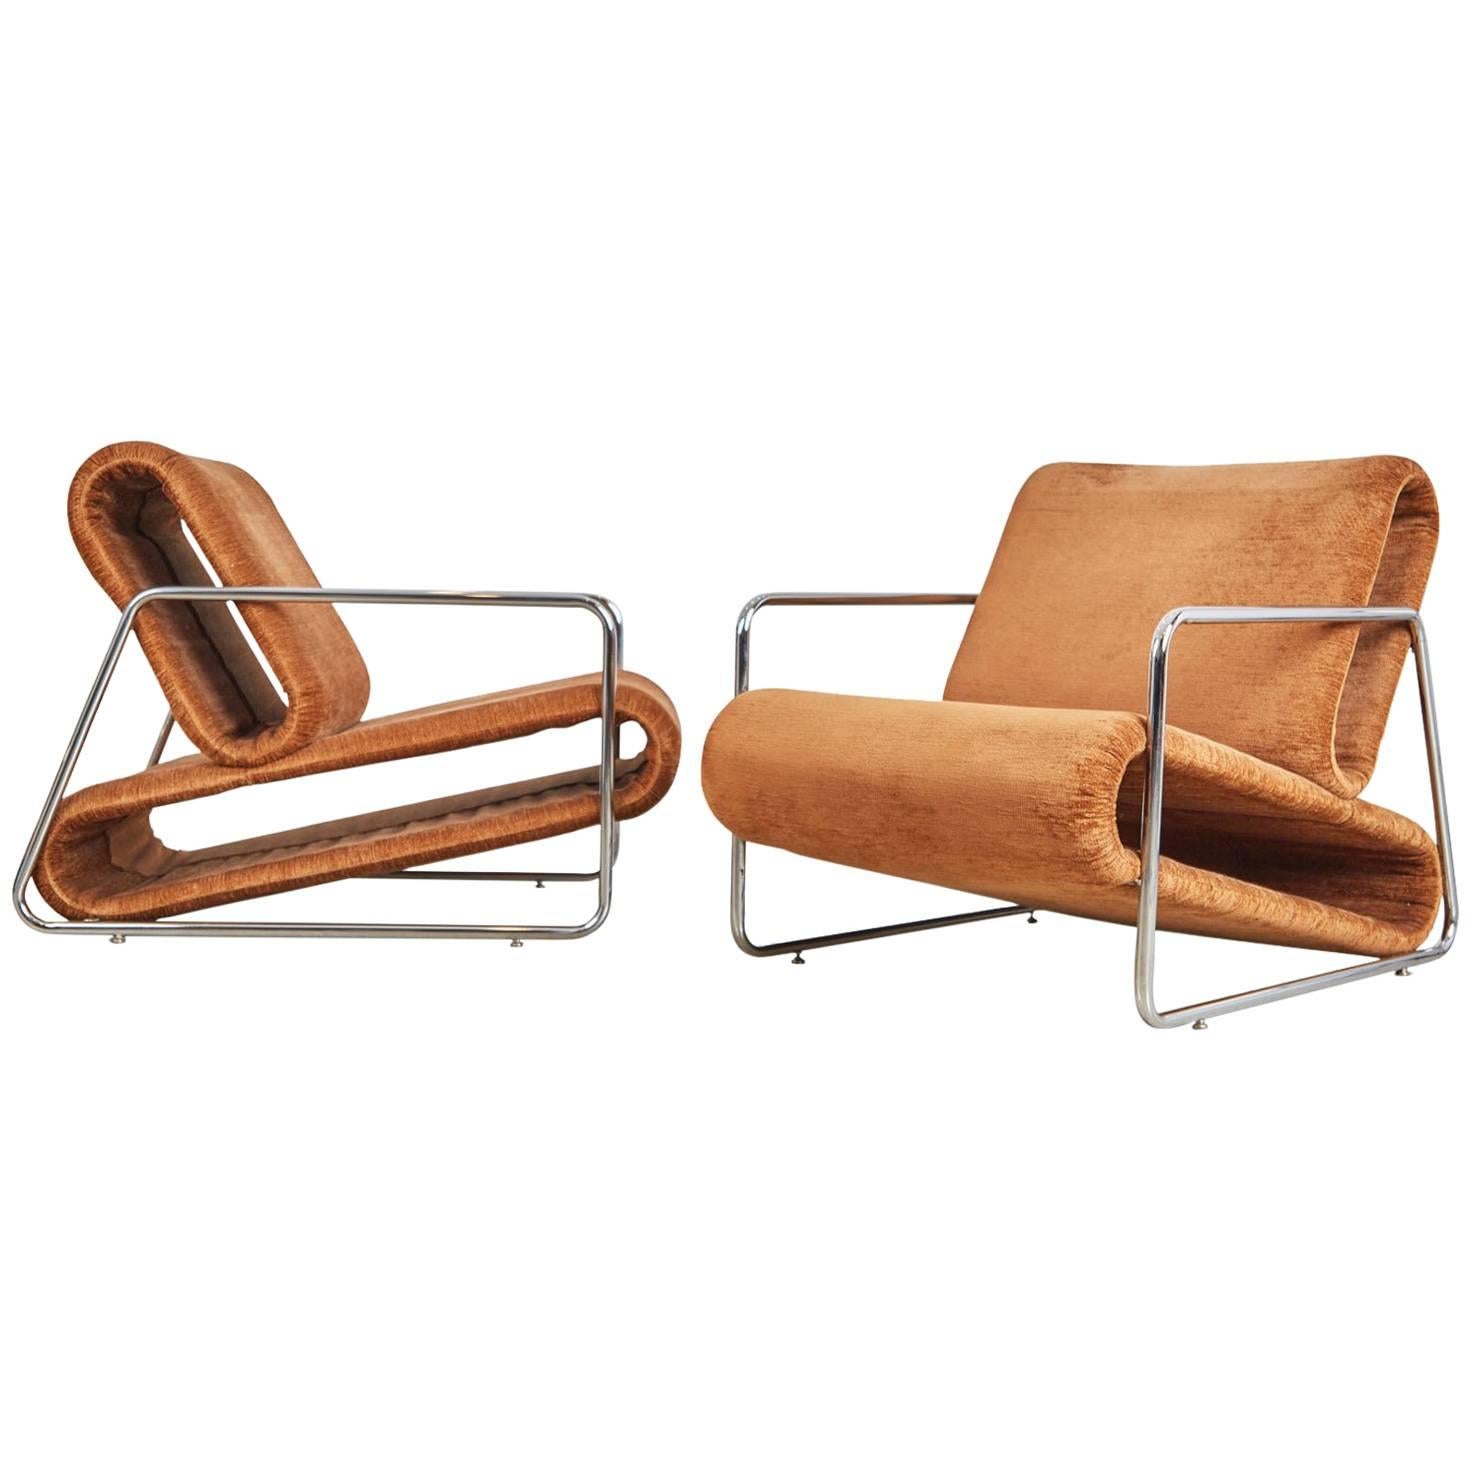 Percival Lafer Prototype Lounge Chairs from Brazil, circa 1970